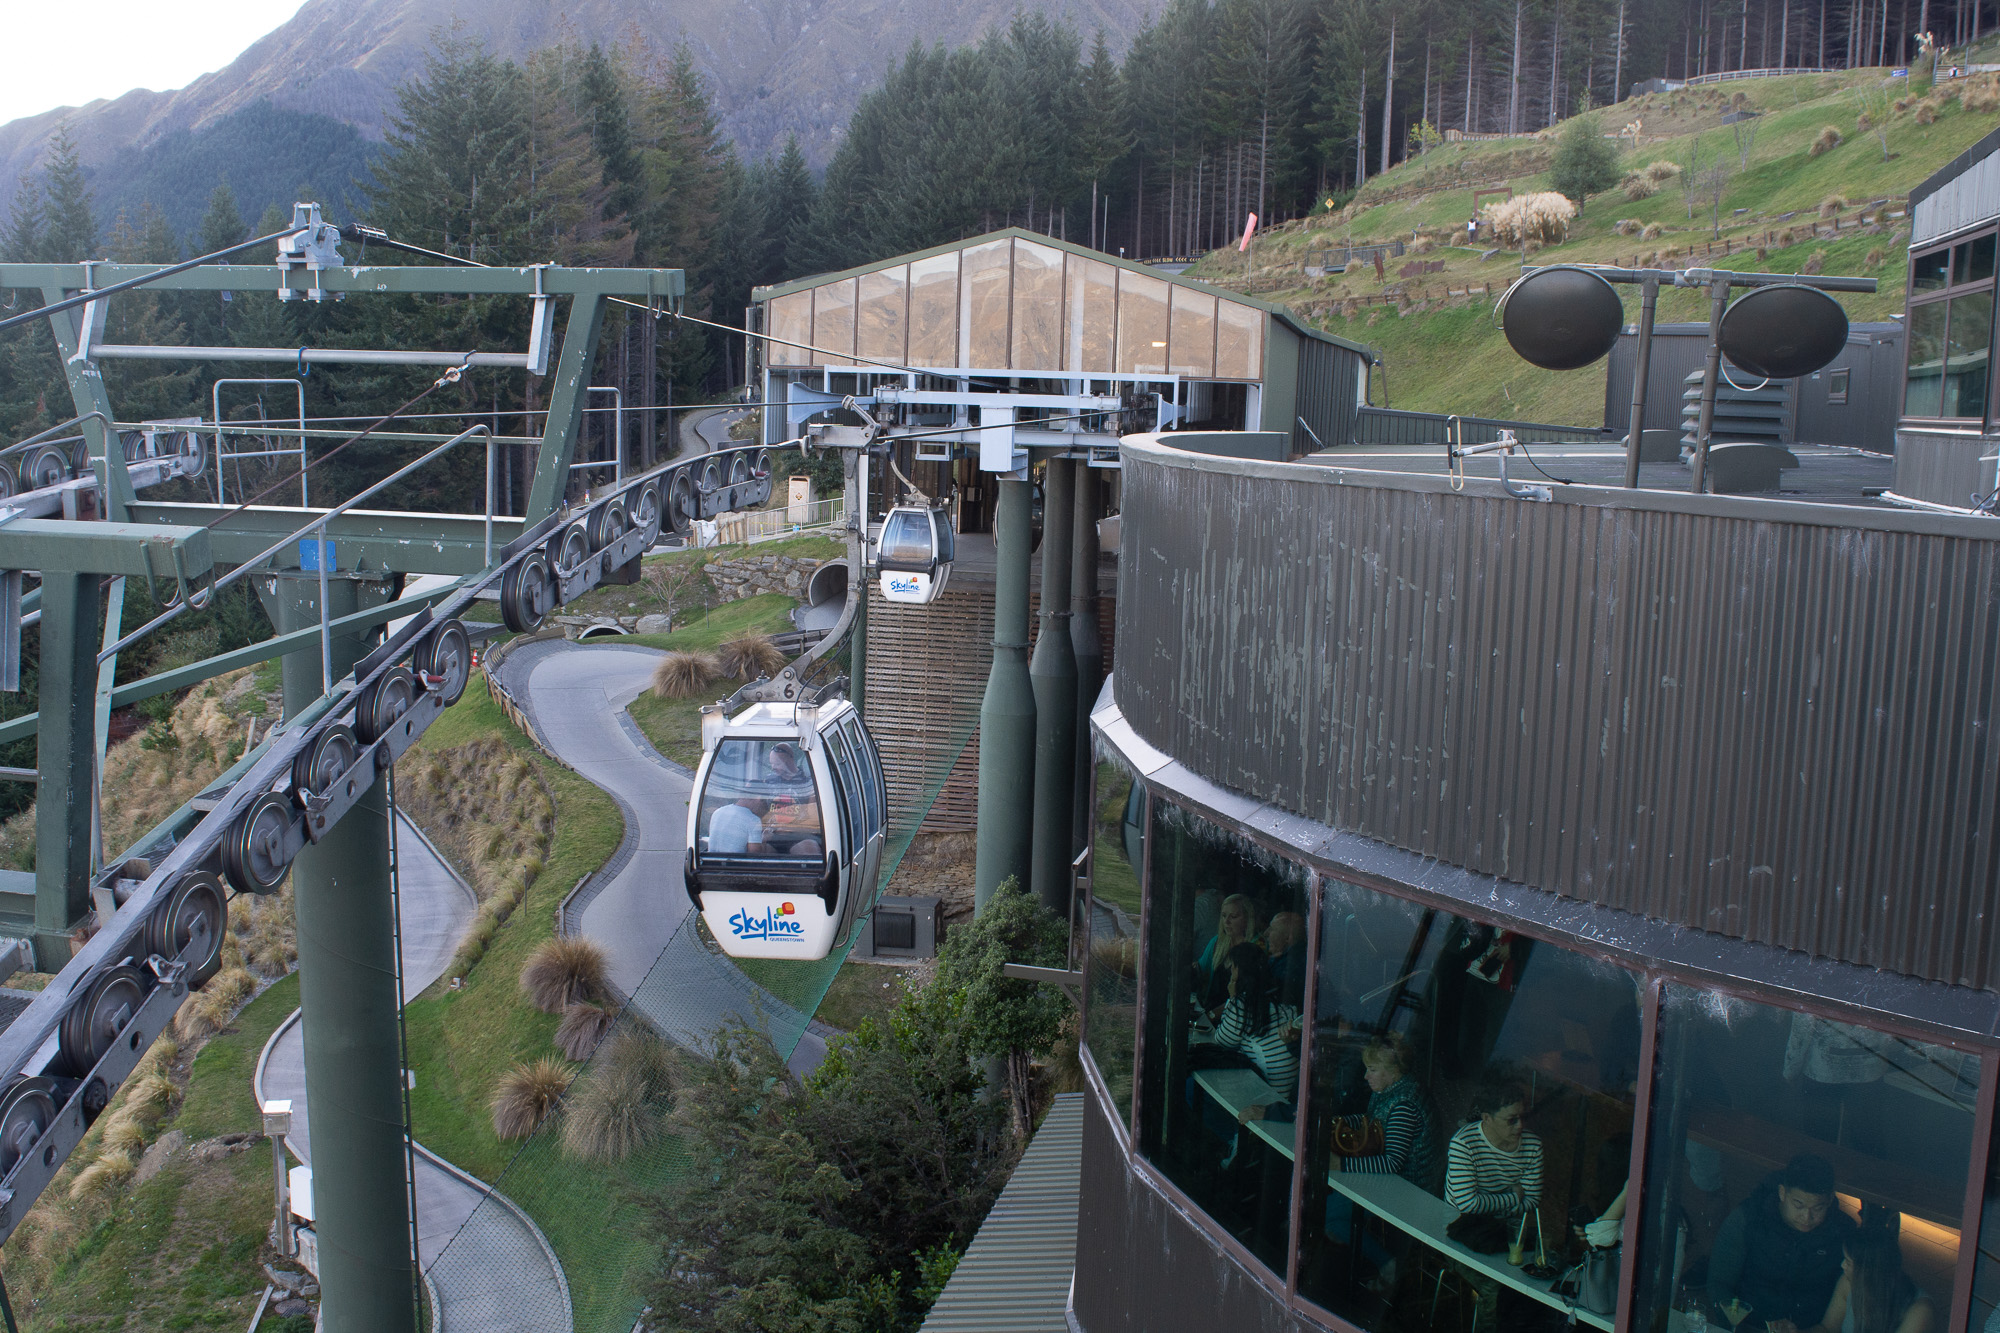 This is the end of the line for the gondola lift out of Queenstown up the mountain to Skyline Queenstown.